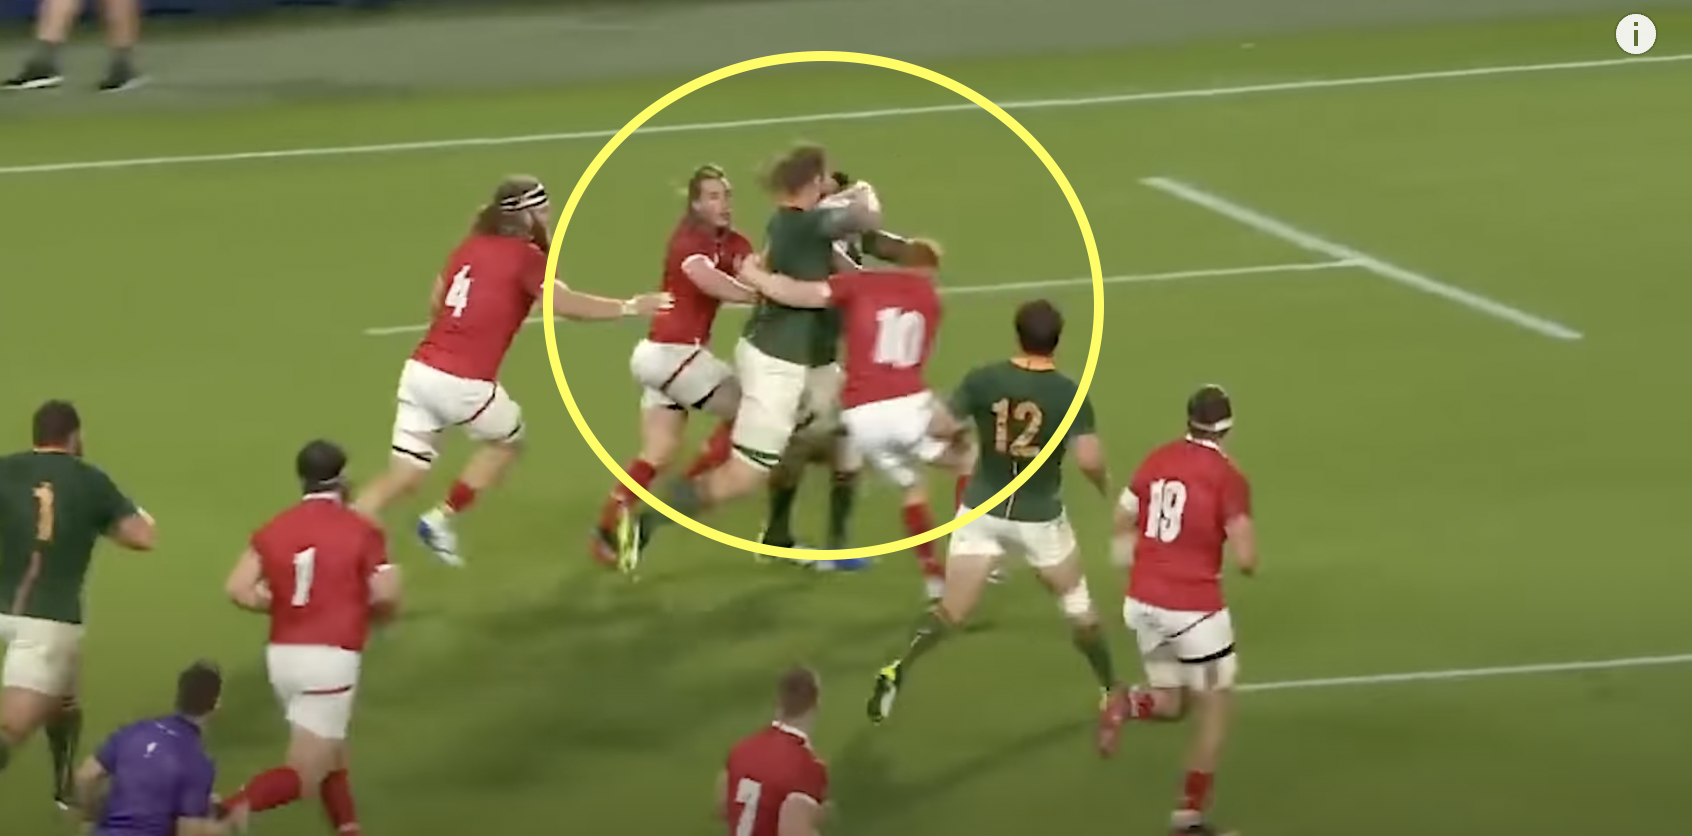 Reminder of what a beast returning Springbok is